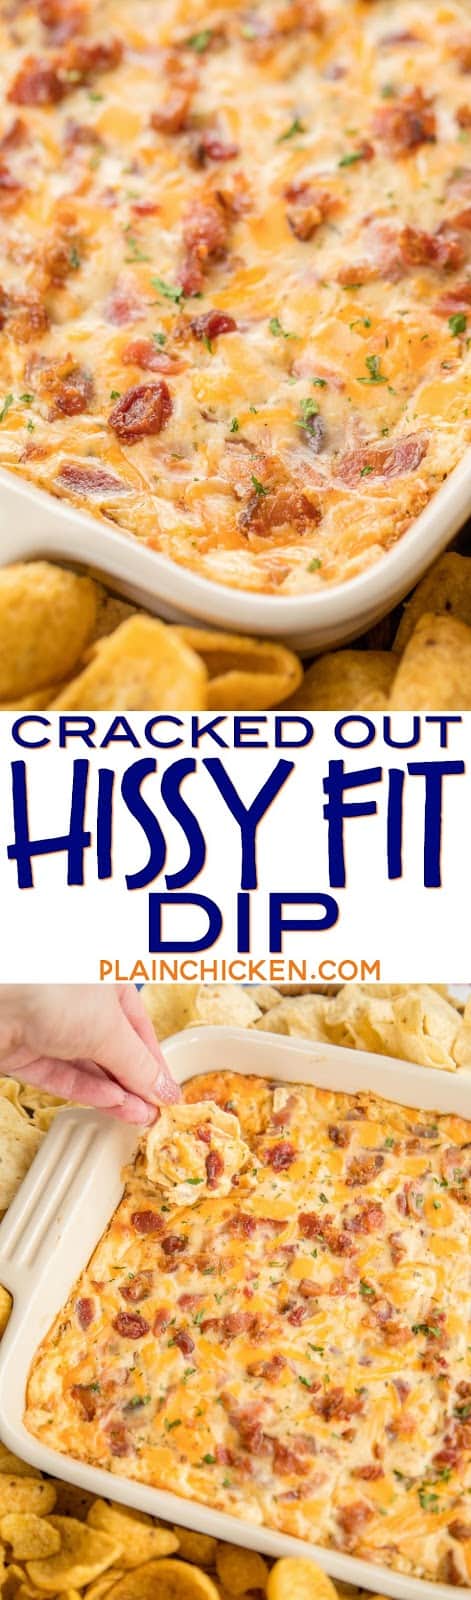 Cracked Out Hissy Fit Dip Recipe - cheddar, bacon, ranch, sour cream, Velveeta, Worcestershire sauce - SO good. You will definitely throw a hissy fit if you miss out on this dip! Crazy good! Can mix together and refrigerate a day before baking. Serve with chips and veggies! It is always gone in a flash!